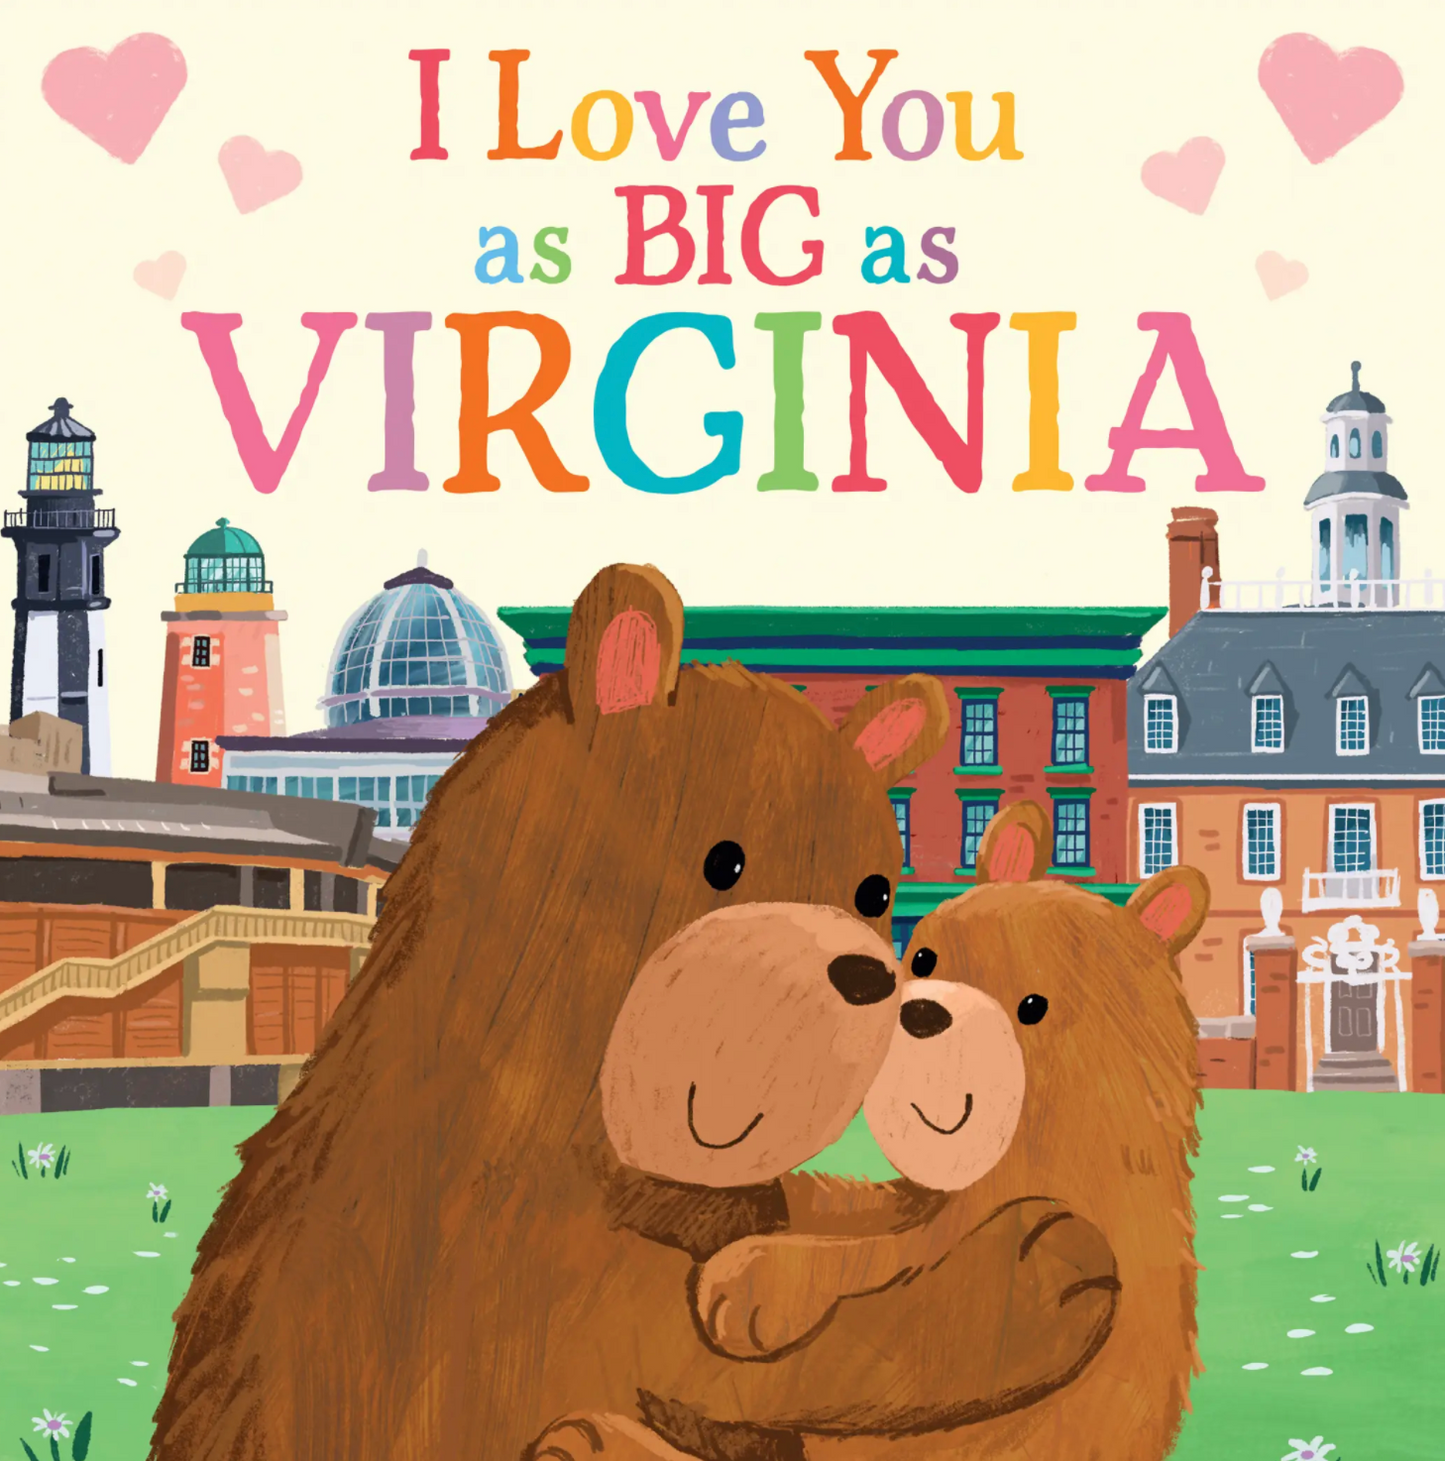 I LOVE YOU AS BIG AS VIRGINIA BY ROSE ROSSNER